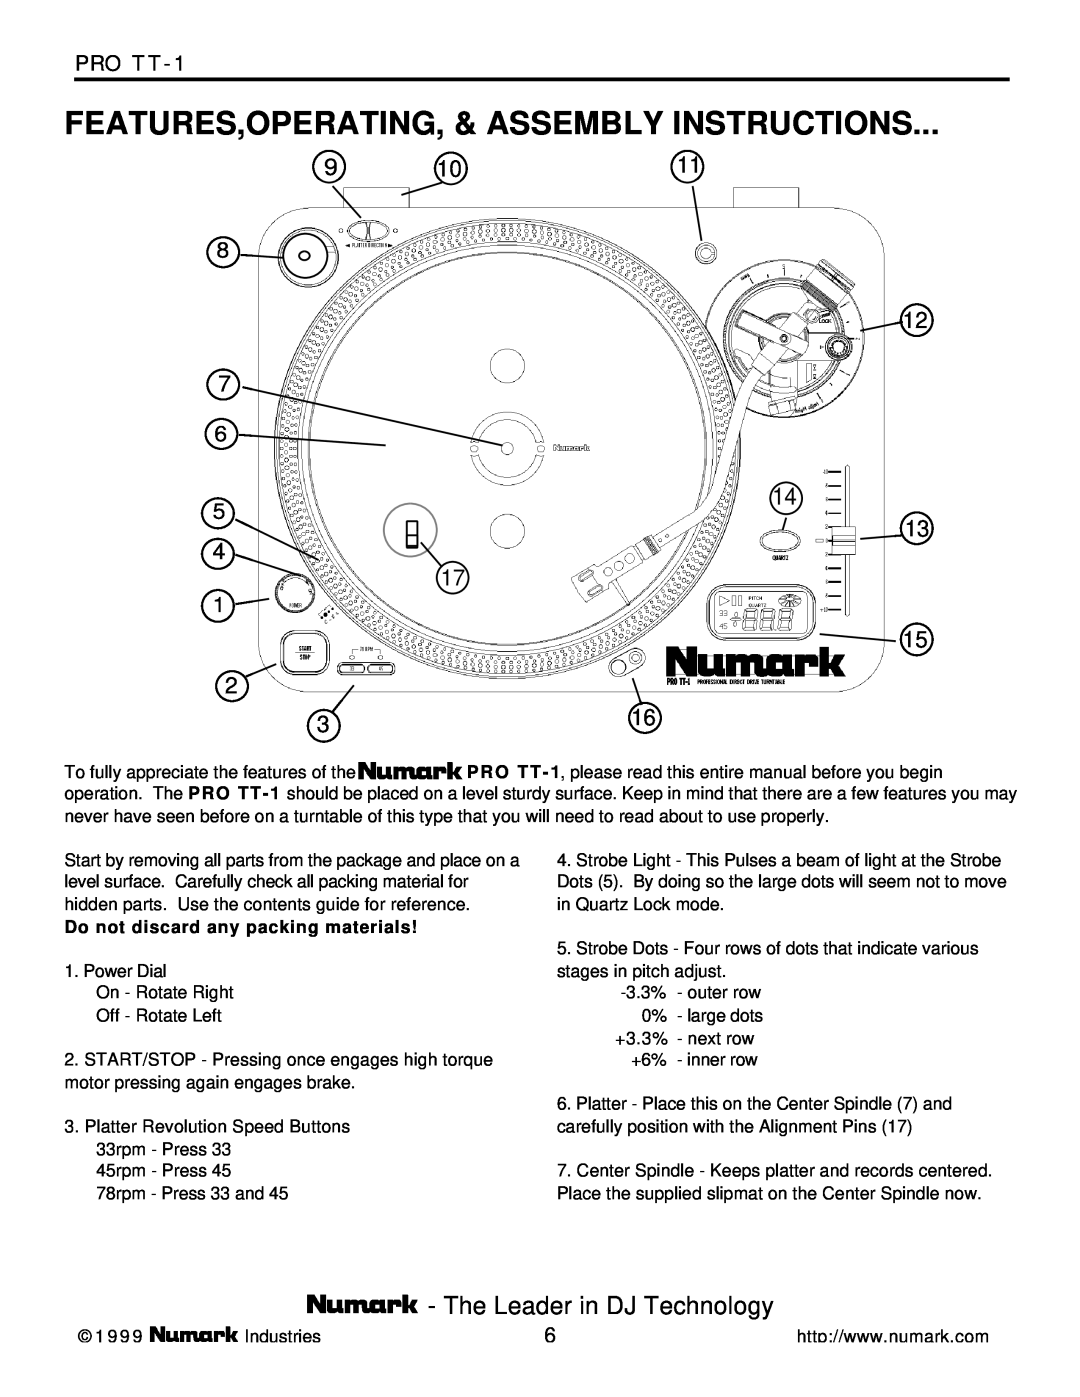 Numark Industries PRO TT-1 owner manual Features,Operating, & Assembly Instructions, The Leader in DJ Technology, 1011 